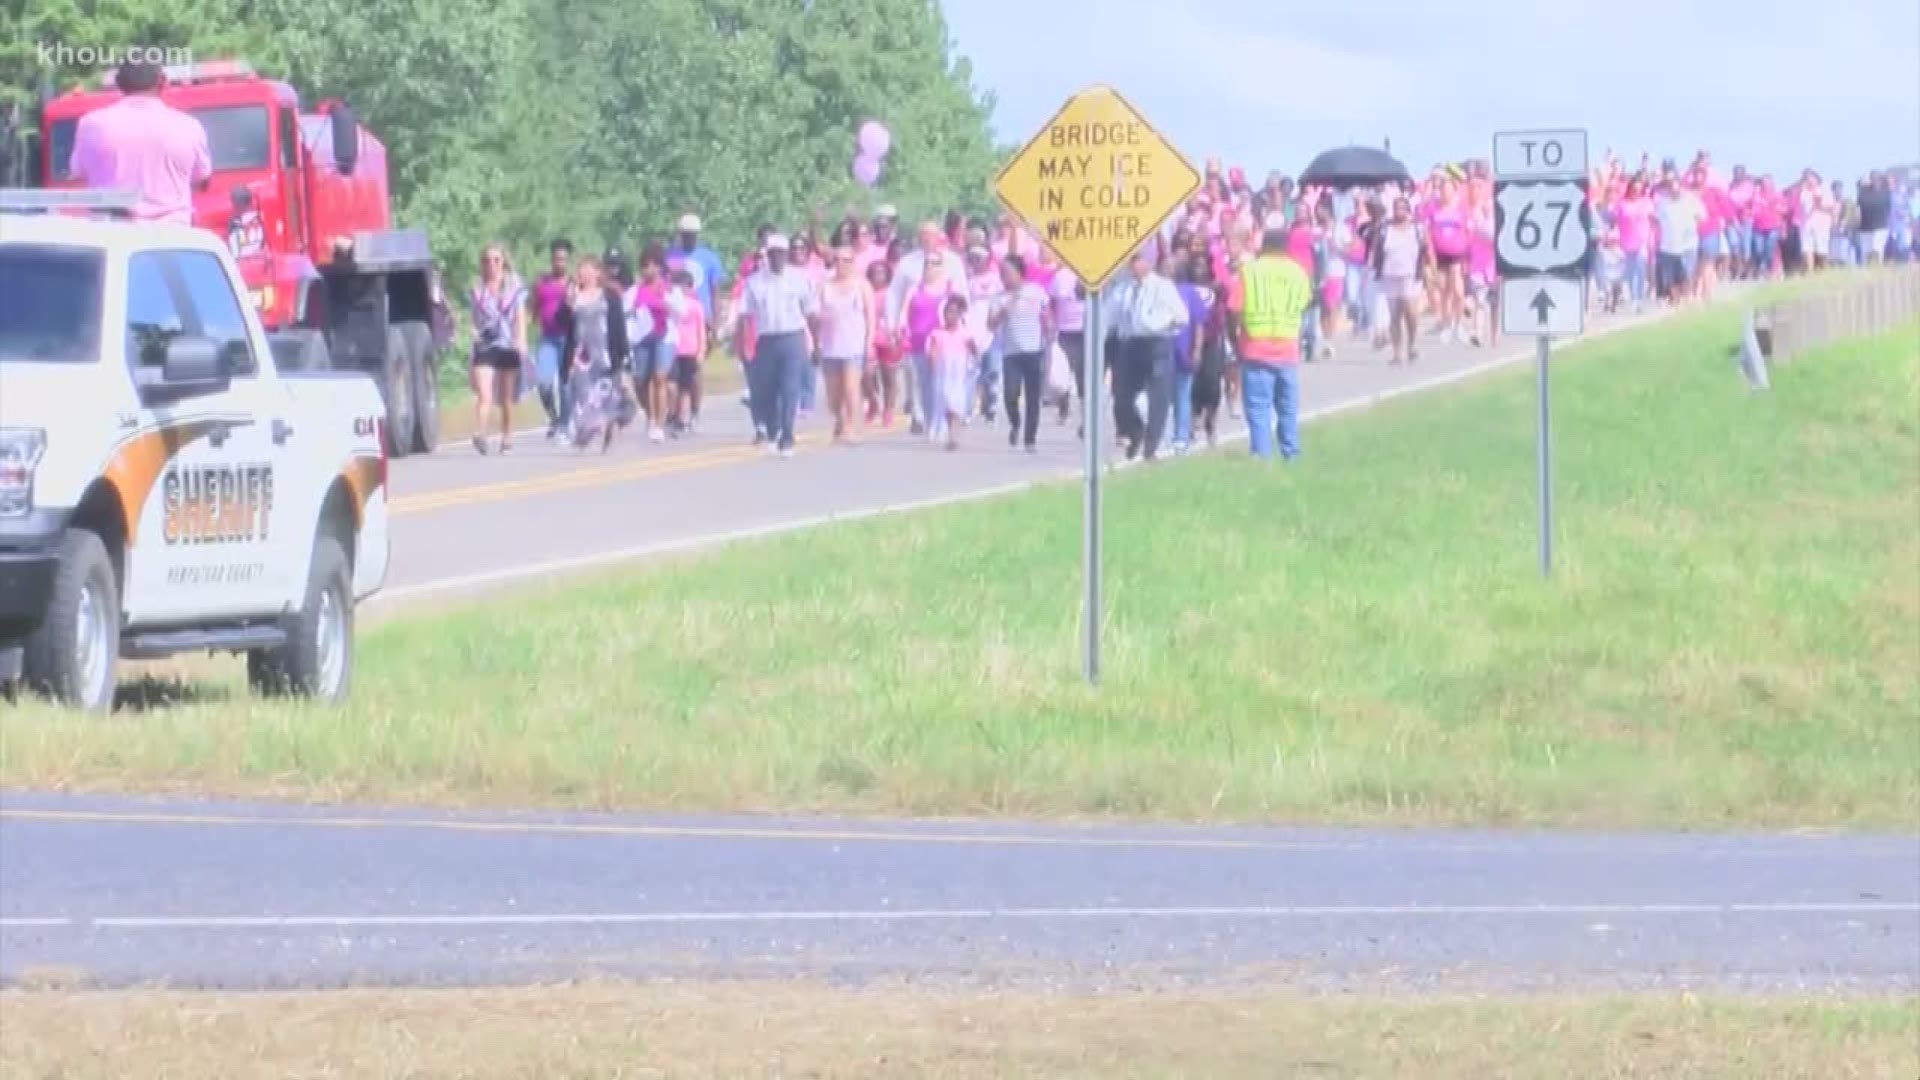 People across the country are looking for justice for Maleah Davis. Her life and story have touched so many hearts. On Saturday in Fulton, Arkansas, where Maleah's remains were found last week, hundreds gathered for a vigil.